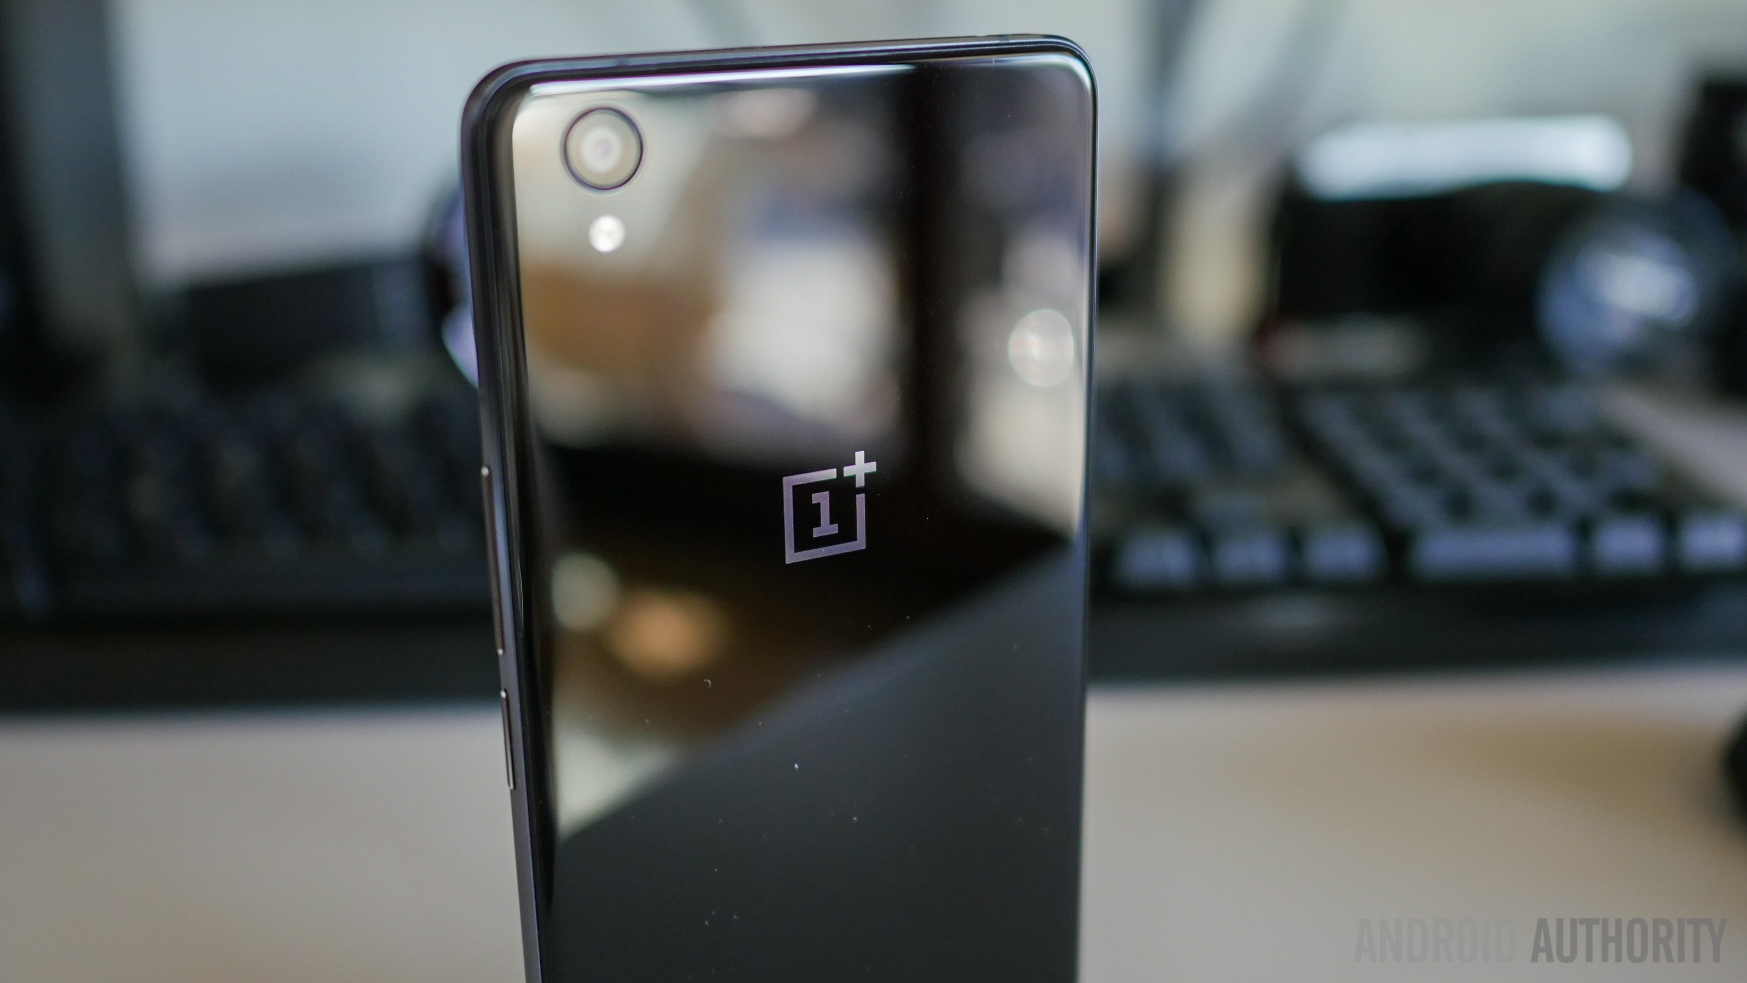 oneplus x first 48 hours aa (17 of 33)